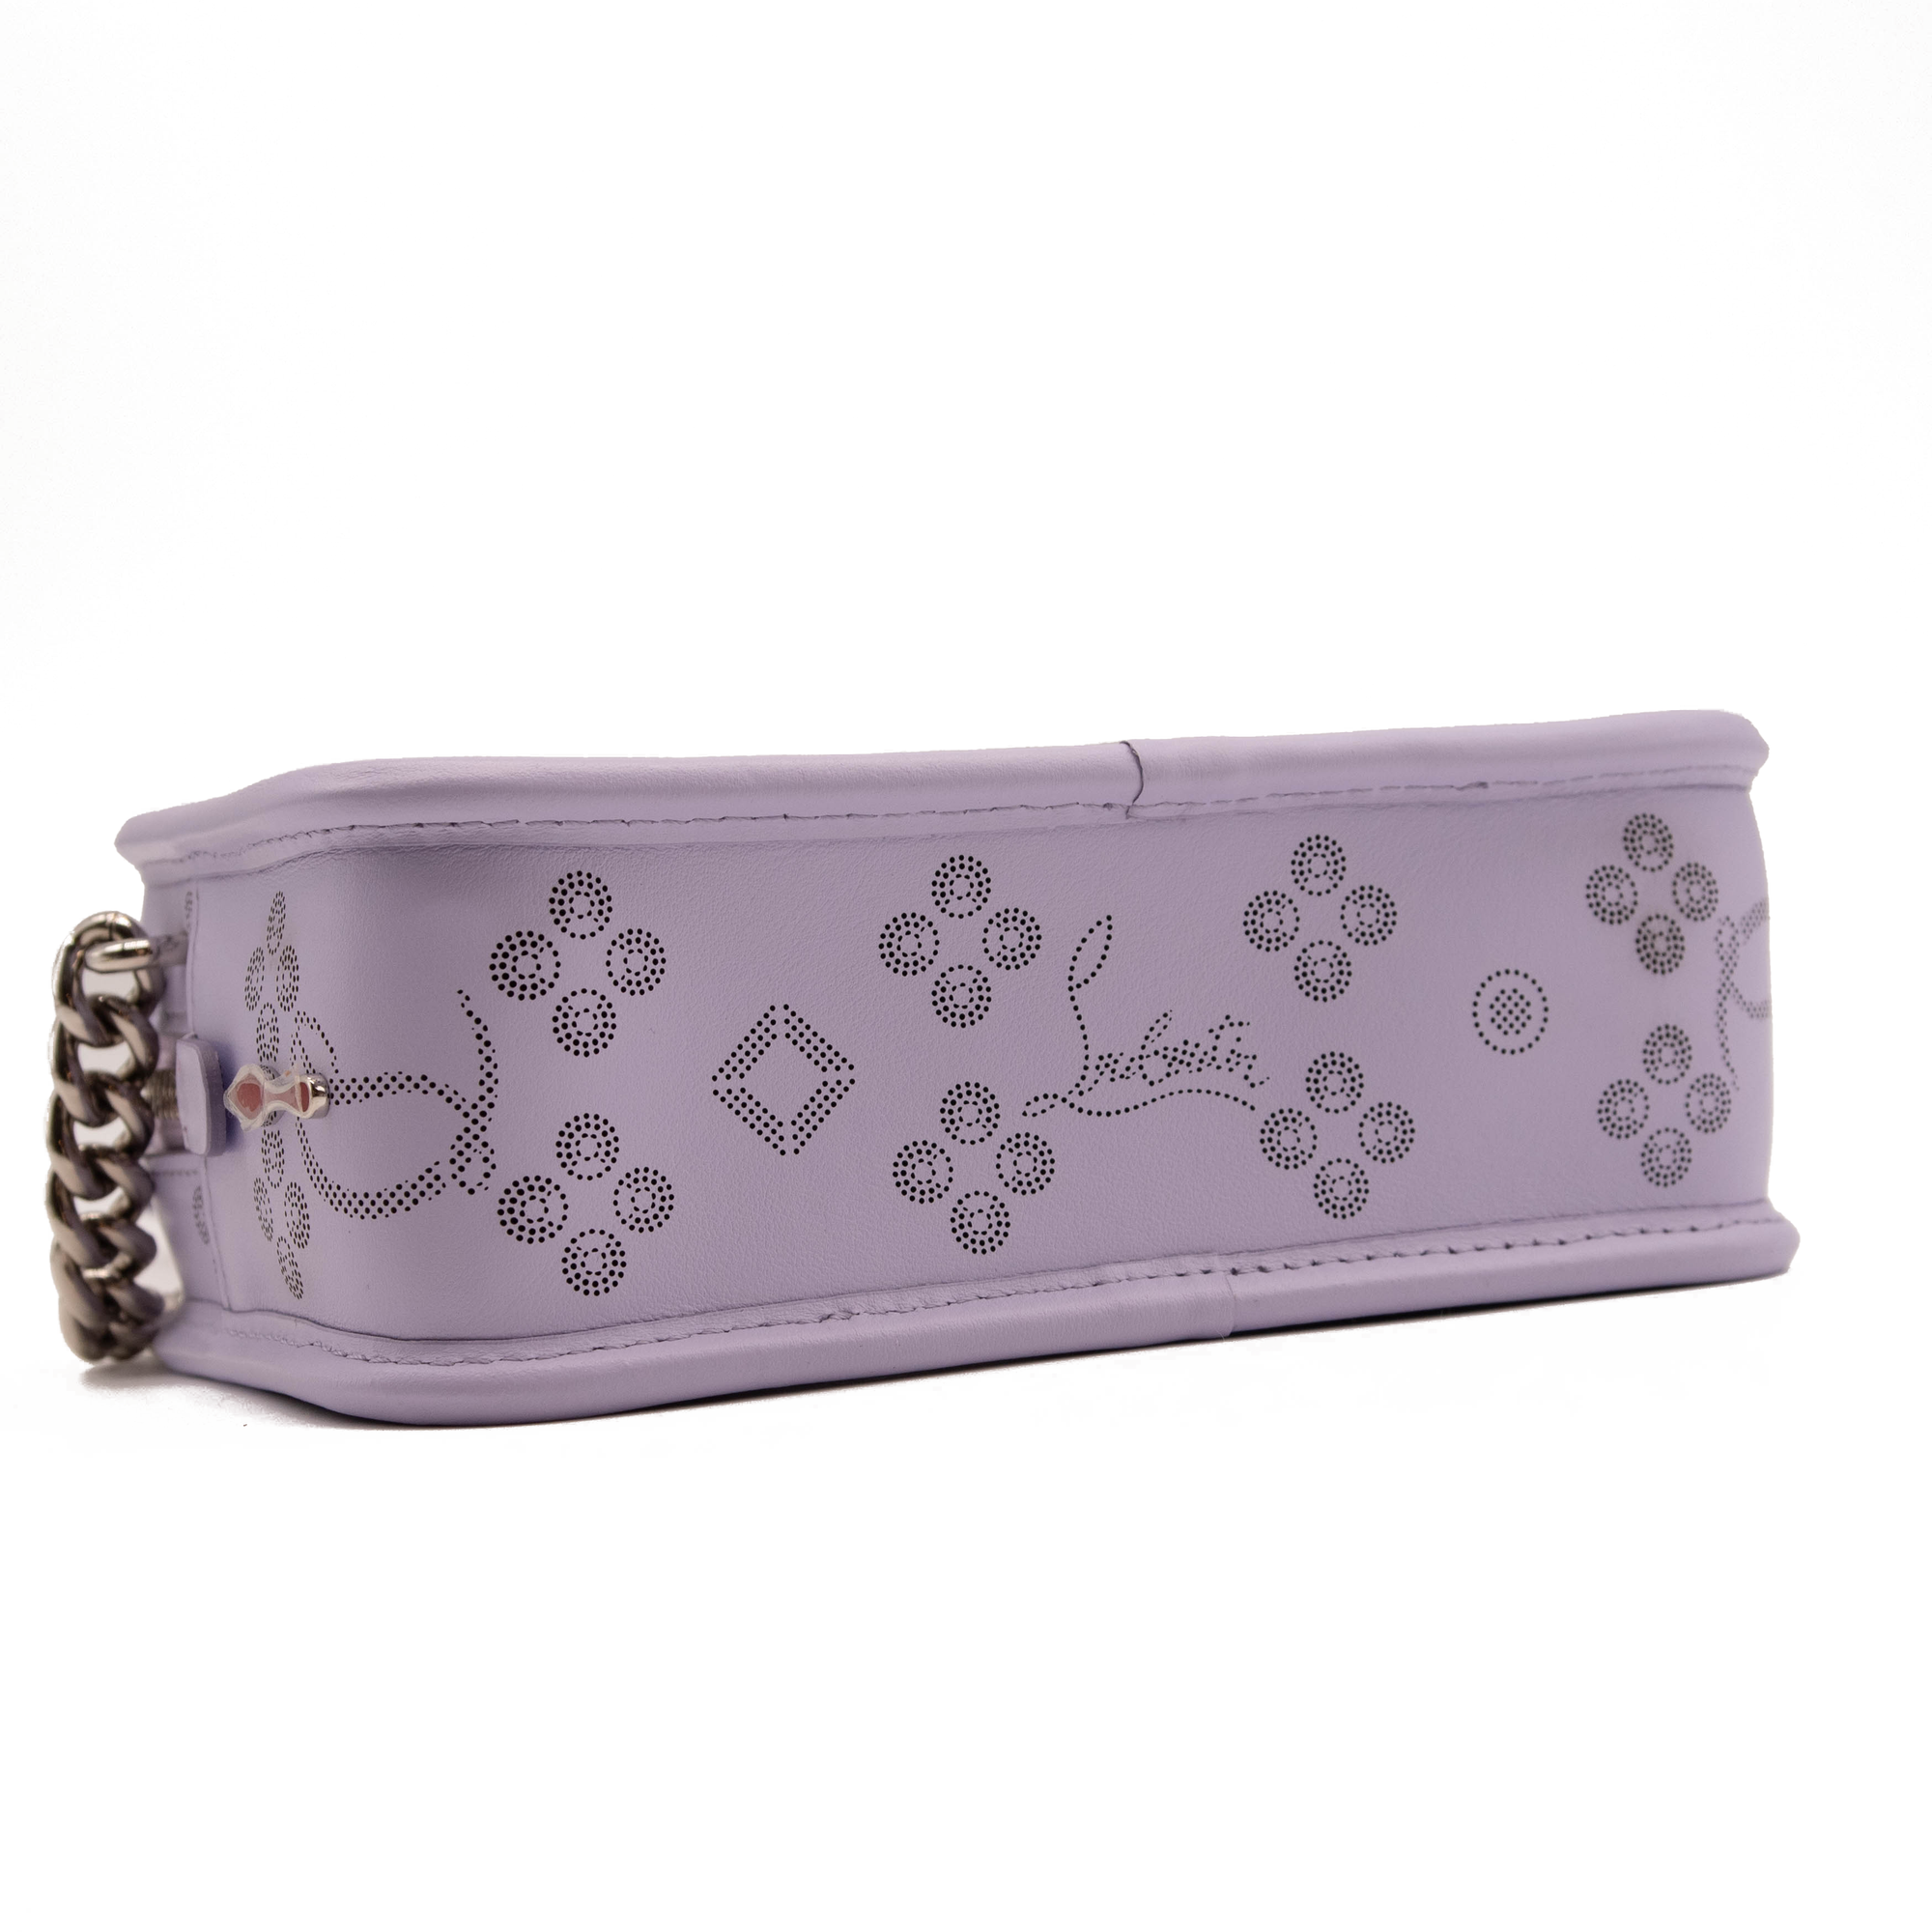 Loubila Perforated Leather Clutch in Purple - Christian Louboutin